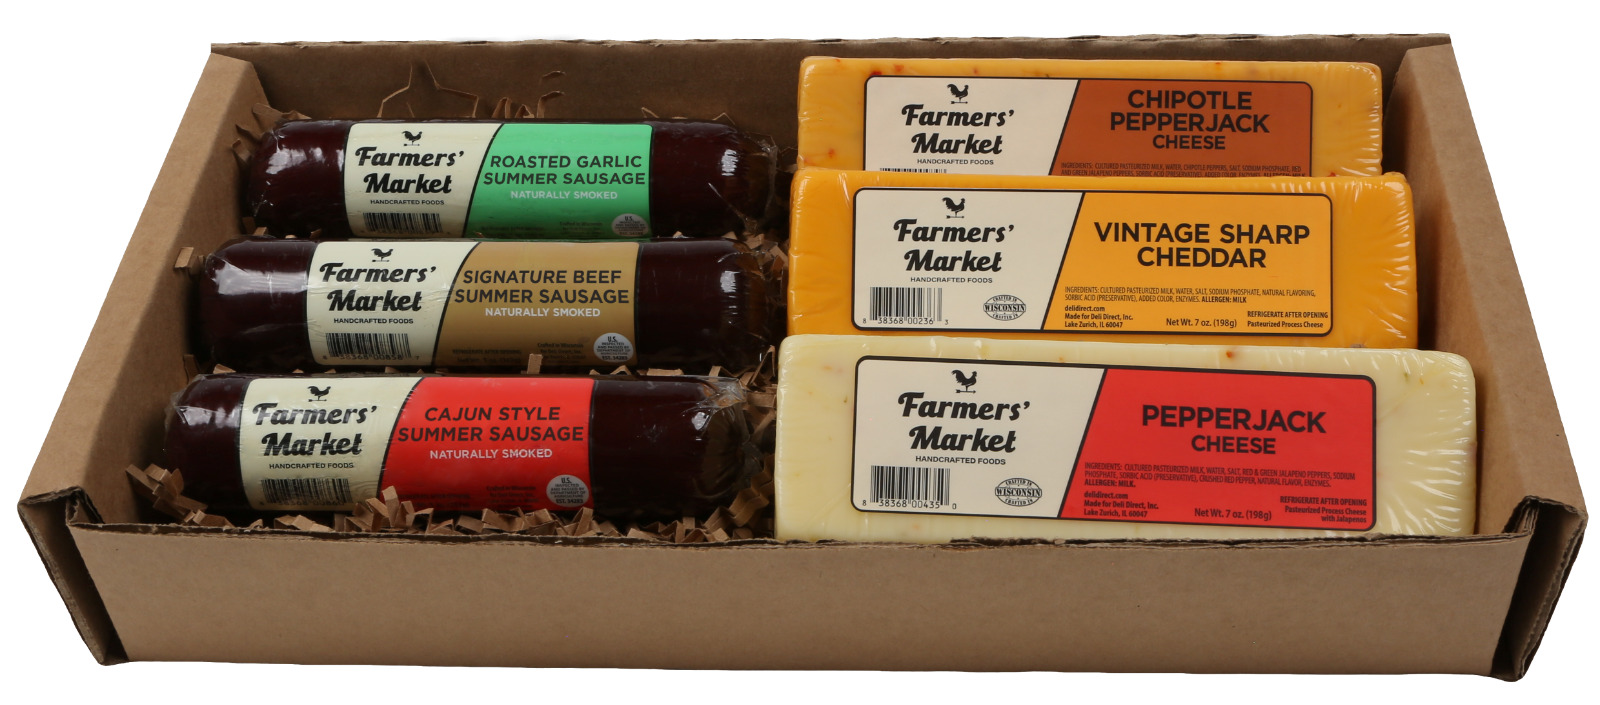 Farmers Market, Charcuterie Gift, Gourmet Meat and Cheese Platter, Large Spicy